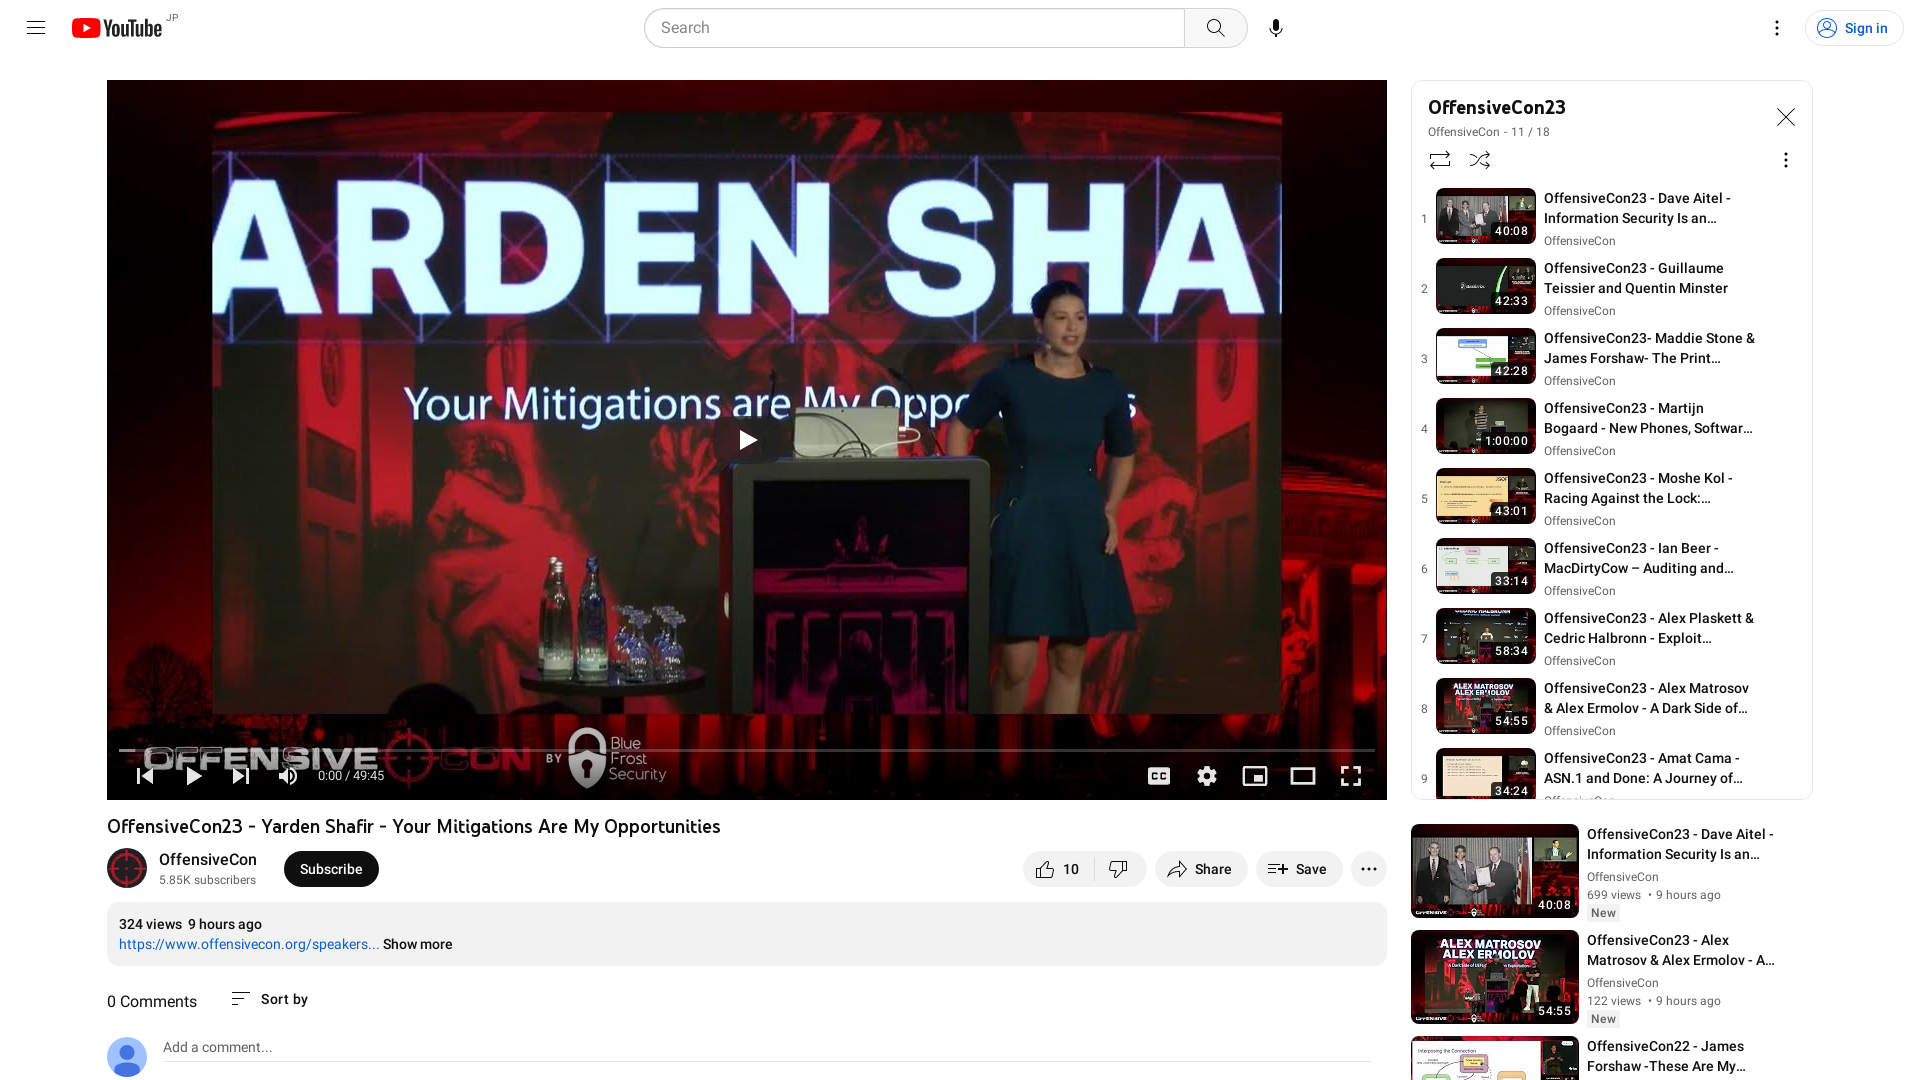 OffensiveCon23 - Yarden Shafir - Your Mitigations Are My Opportunities - YouTube